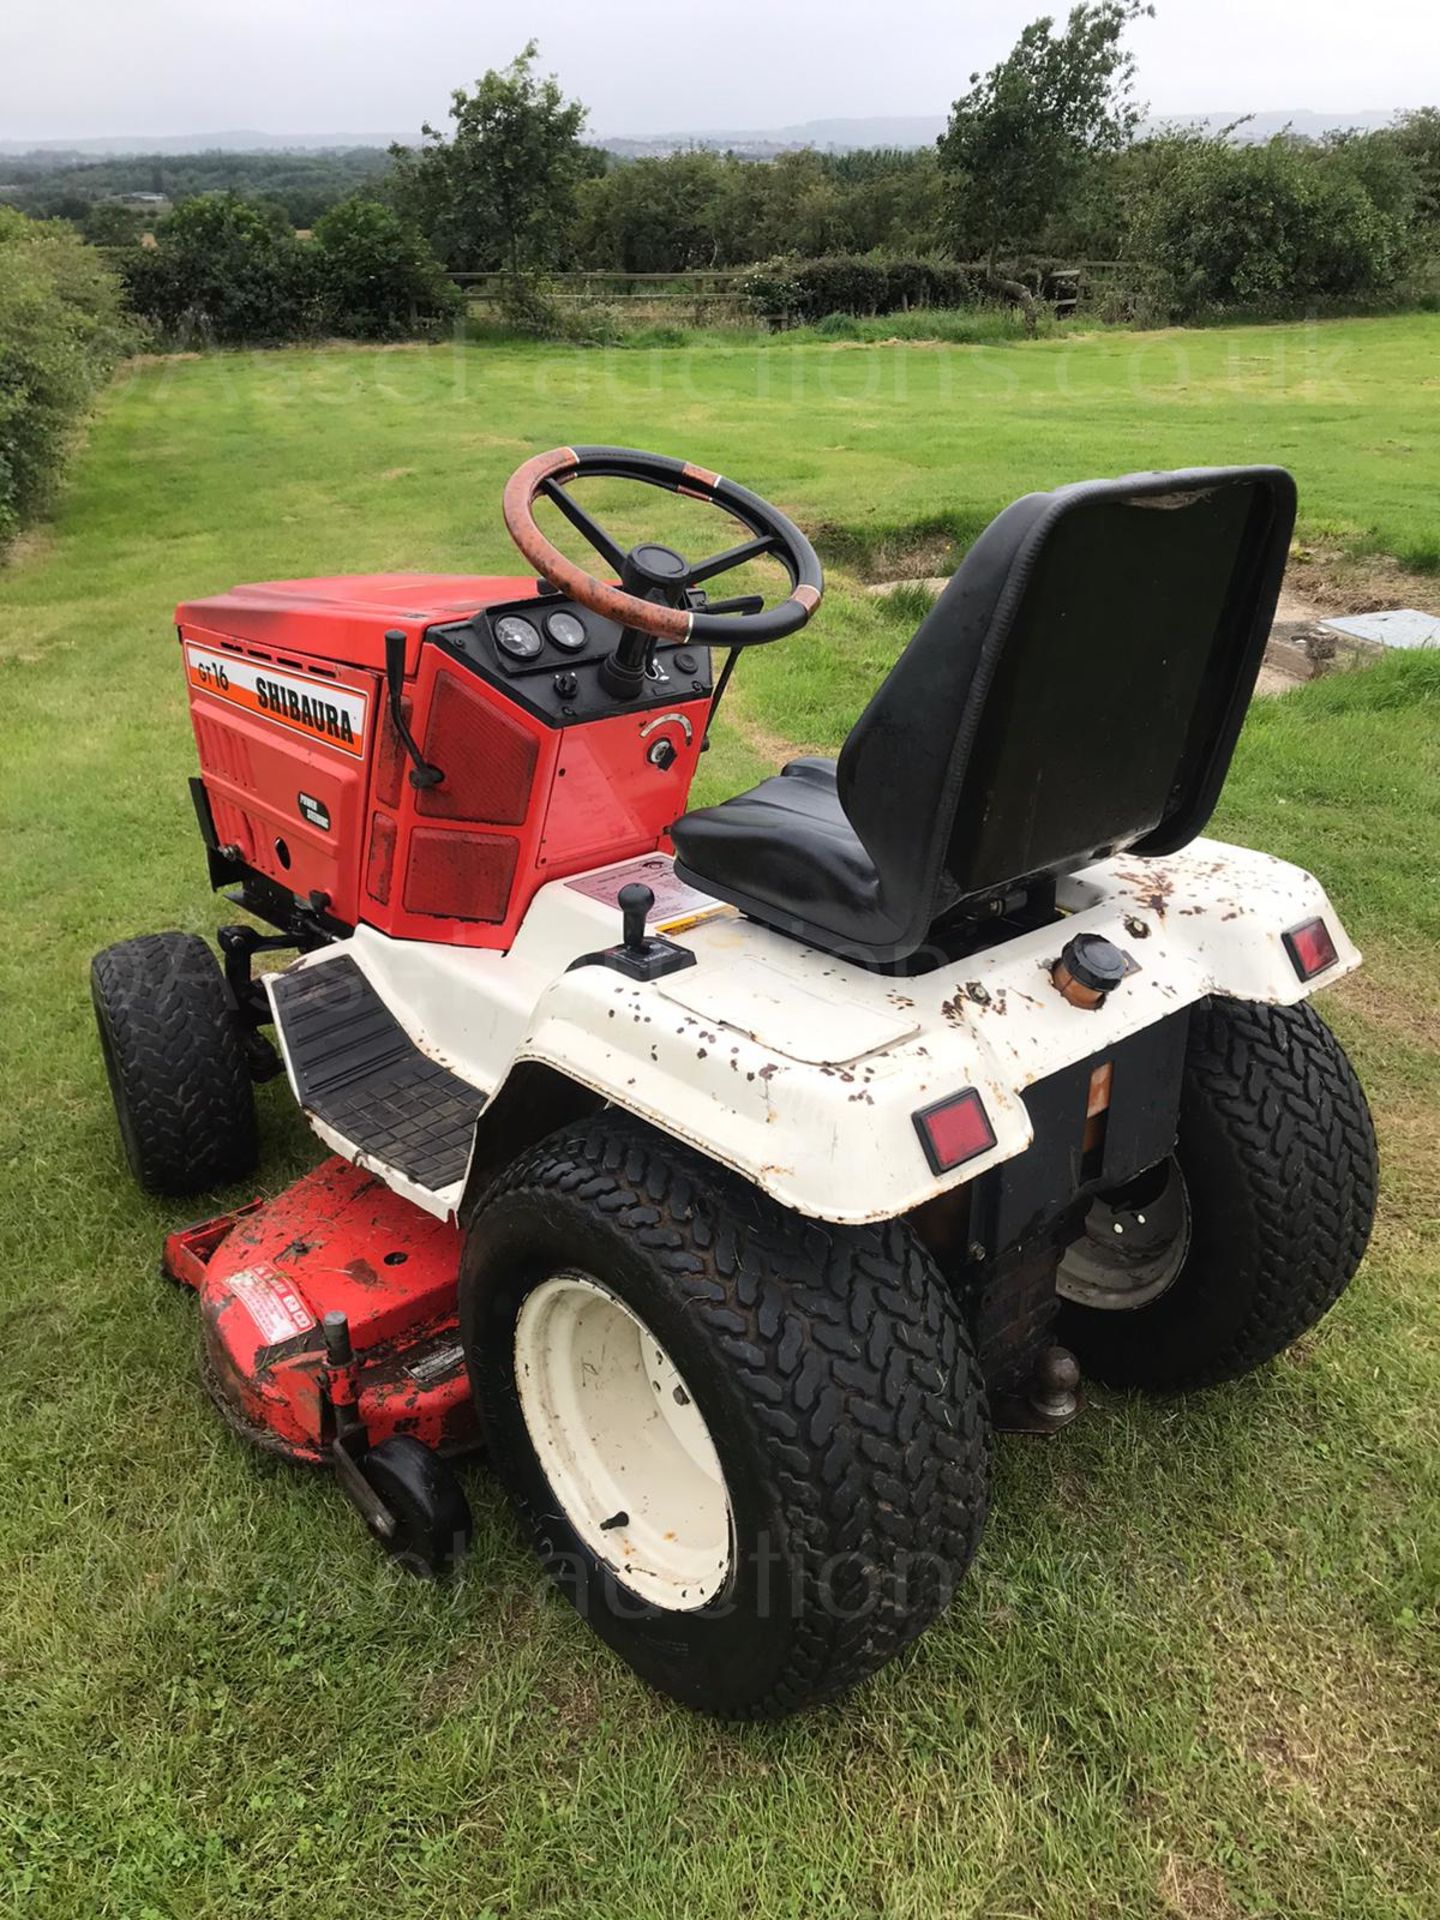 DIESEL SHIBAURA GT16 RIDE ON LAWN MOWER, RUNS, DRIVES AND CUTS, HYDROSTATIC DRIVE, *NO VAT* - Image 3 of 5